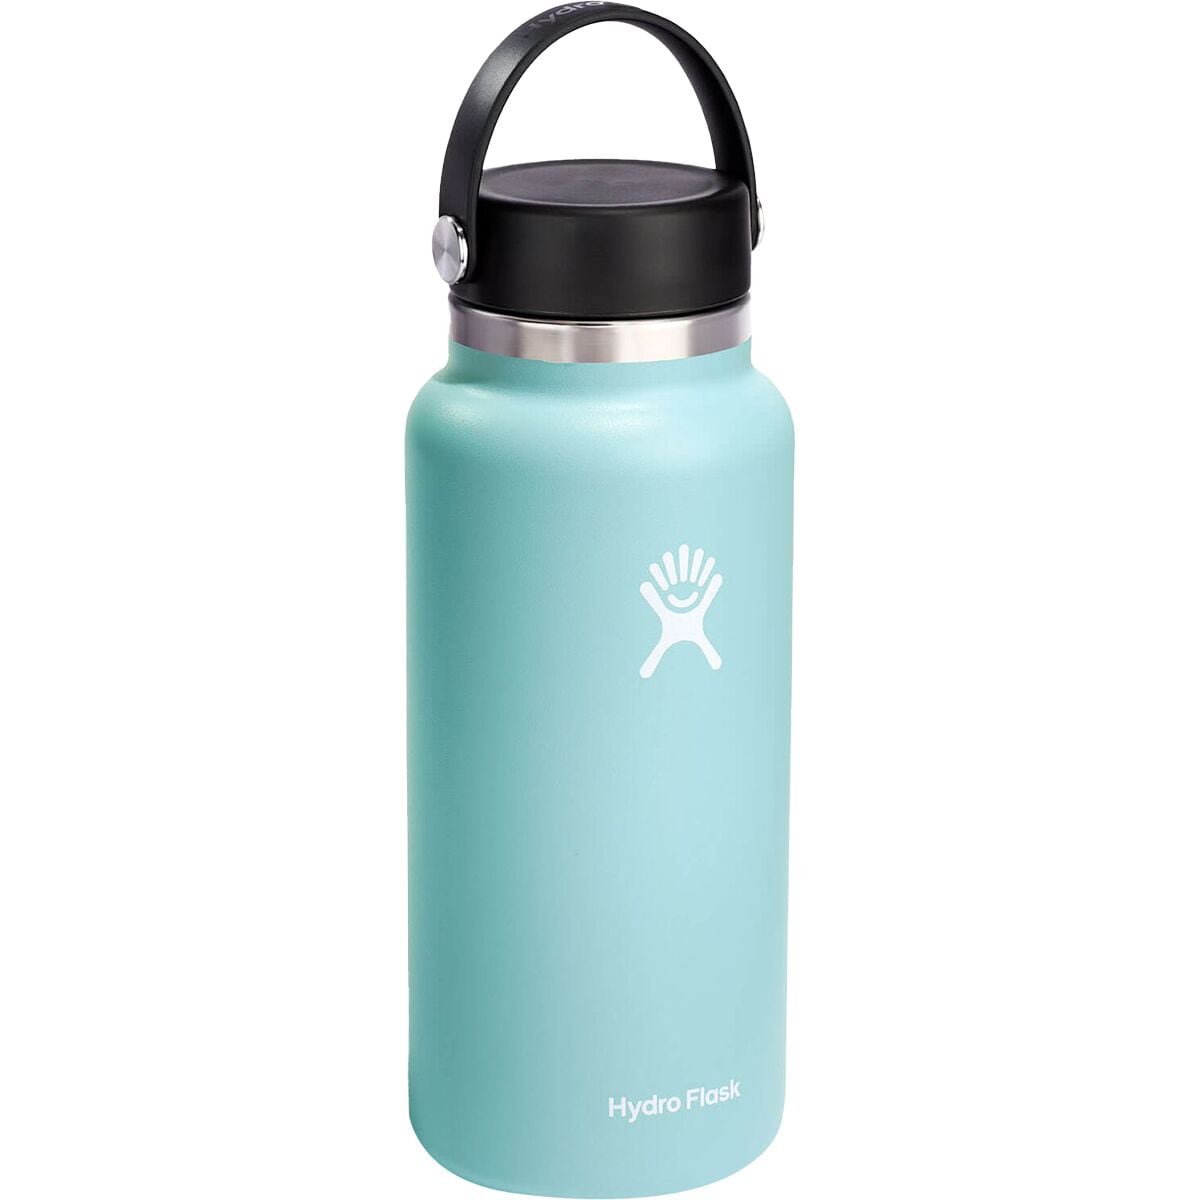 Hydro Flask Flex Boot  Give your Hydro Flask-addicted friend